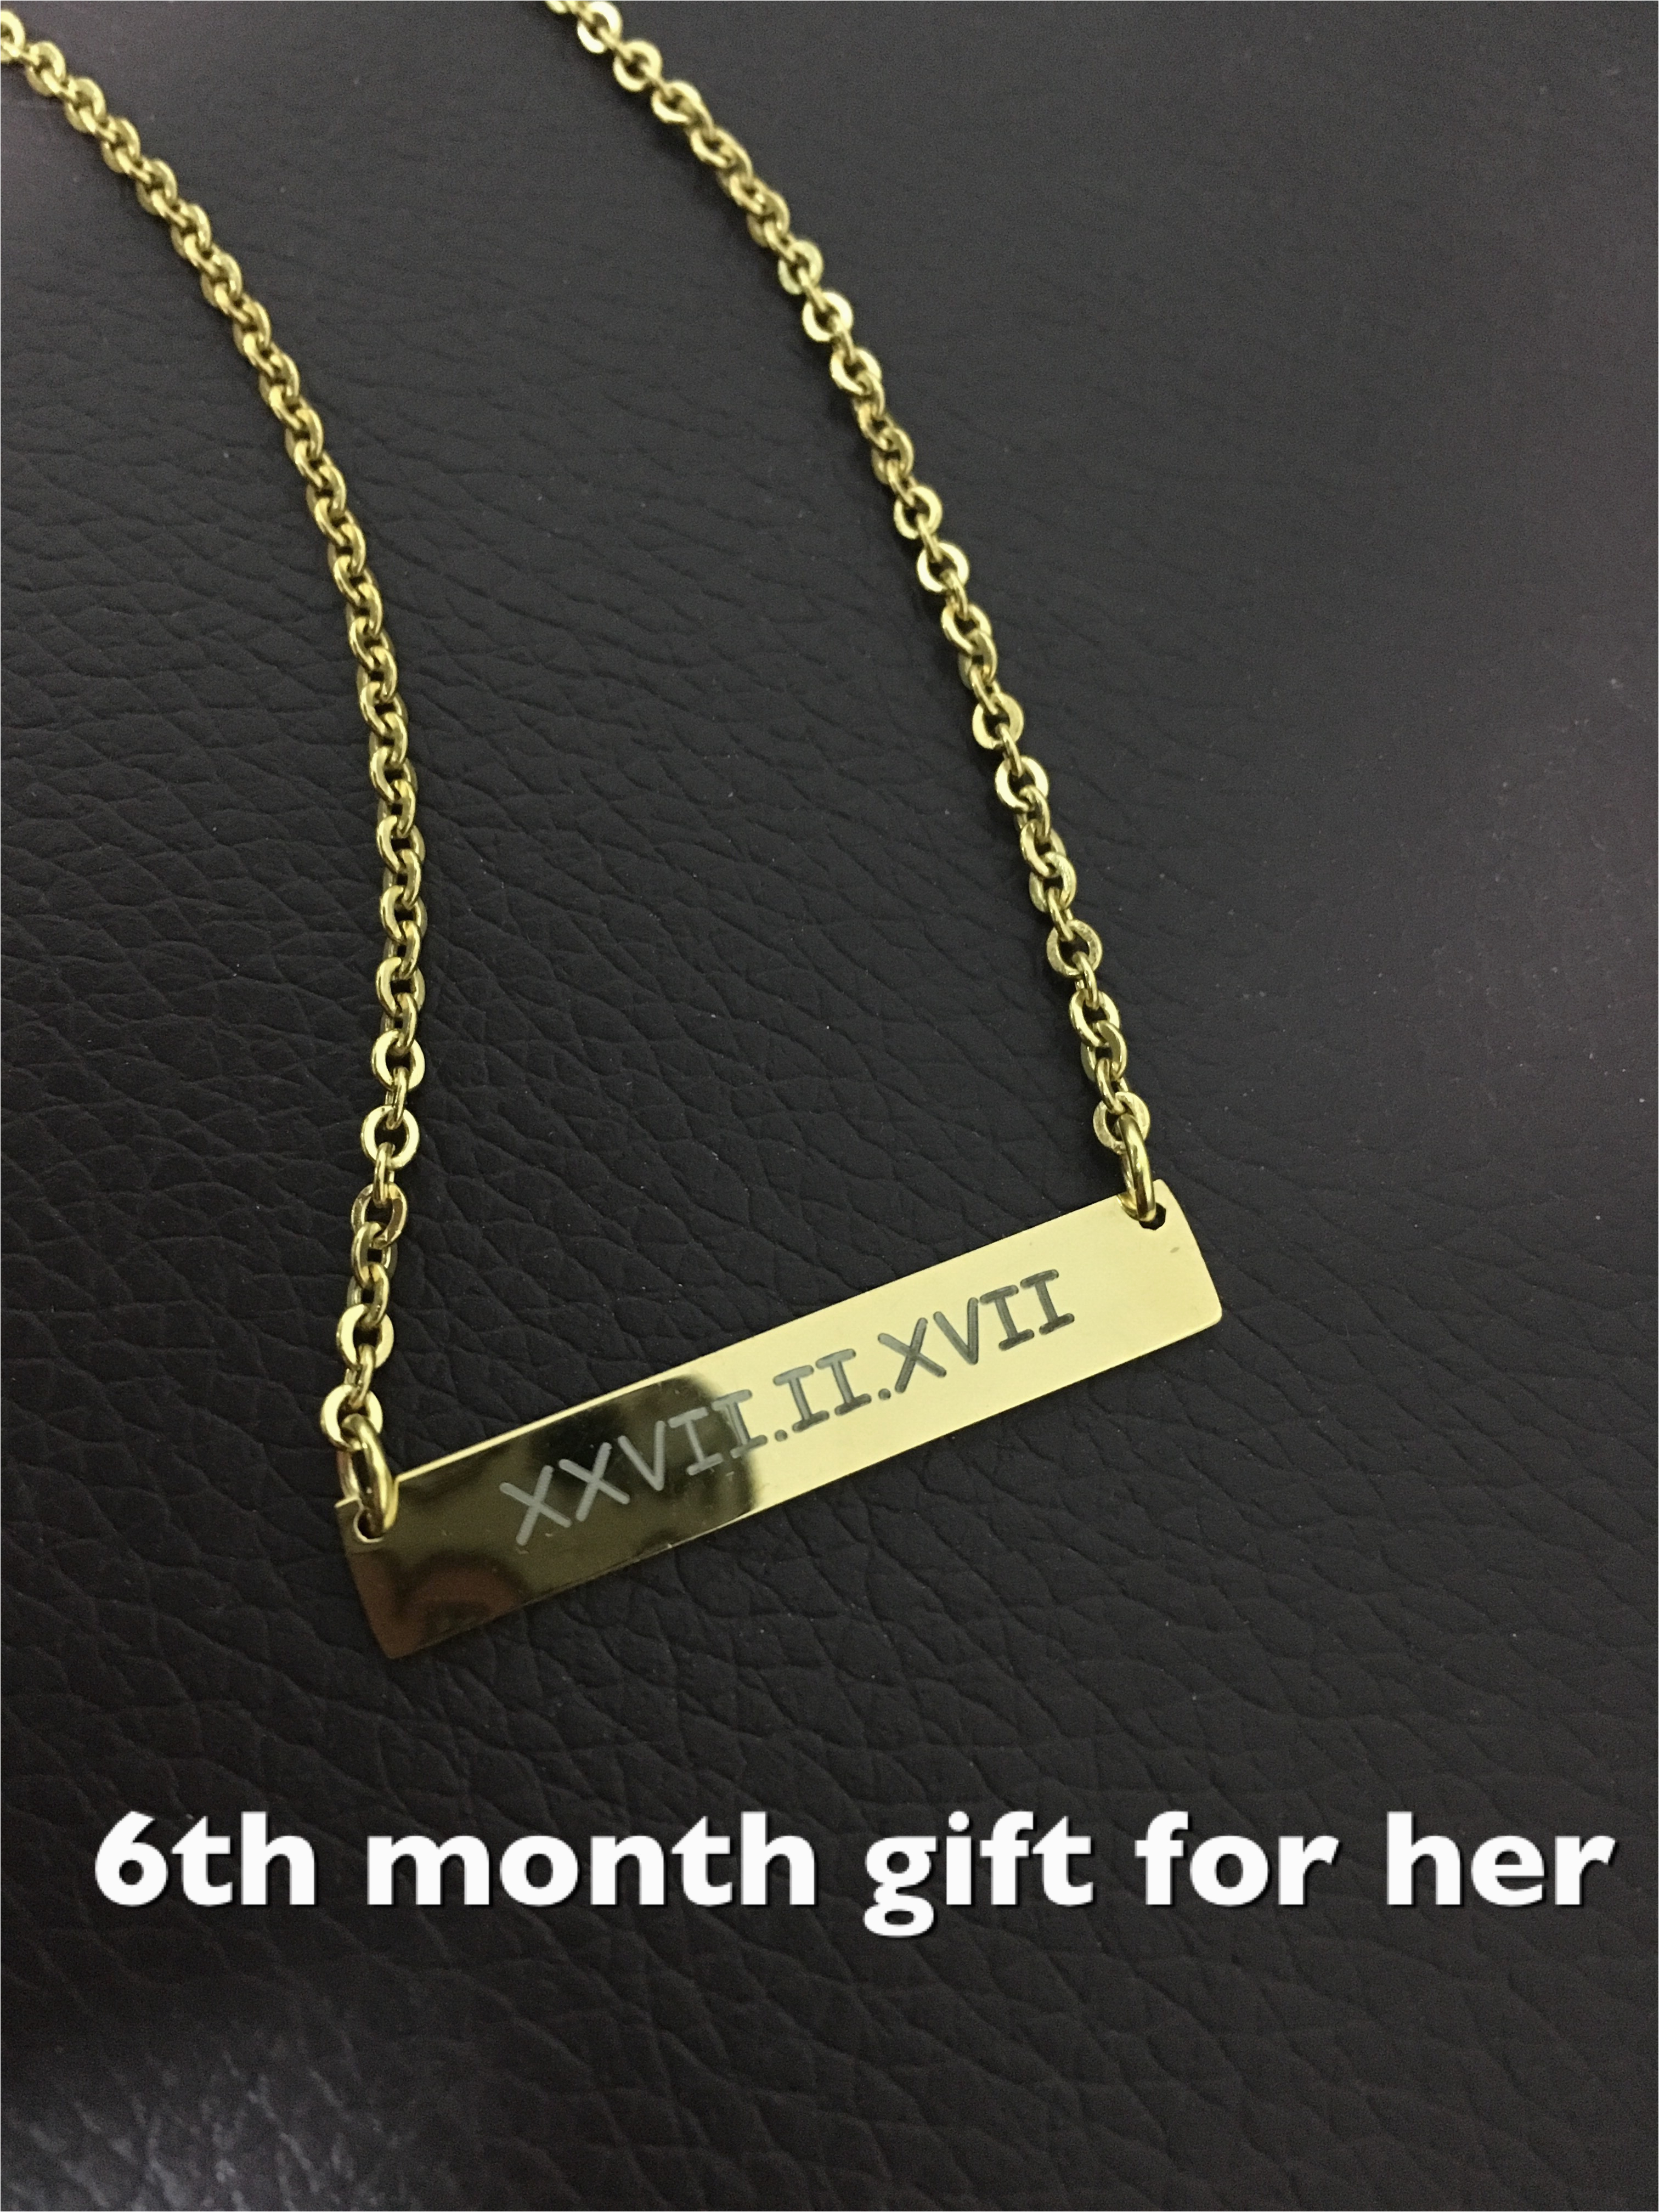 custom engraved necklace for her girlfriend gift